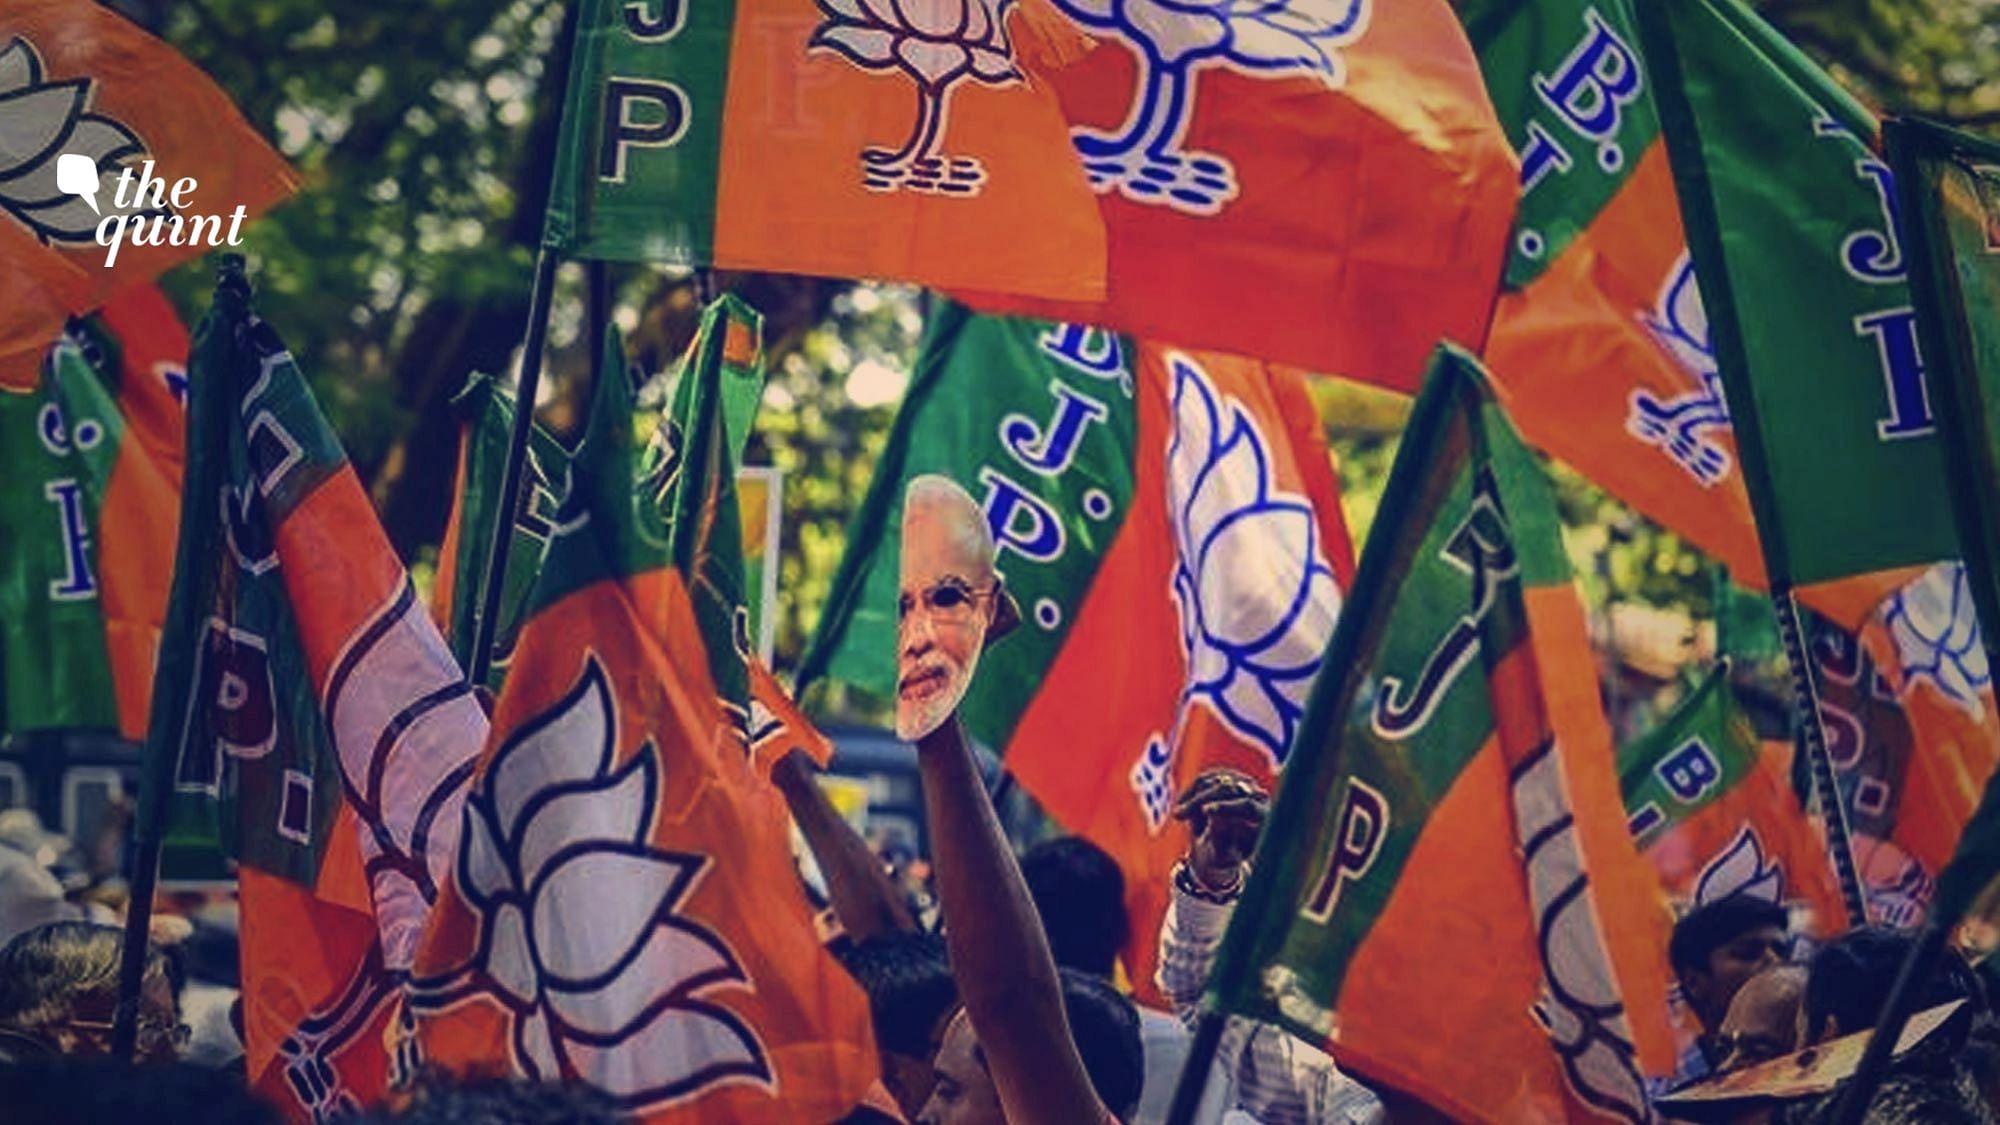 <div class="paragraphs"><p>Amid a deluge of online backlash, Twitter on Sunday, 20 February removed a derogatory post by the Bharatiya Janata Party’s (BJP) Gujarat unit, which featured a caricature applauding the <a href="https://www.thequint.com/news/india/2008-ahmedabad-blasts-judge-awards-death-sentence-to-38-convicts-life-to-11#:~:text=A%20special%20court%20on%20Friday,life%20imprisonment%2C%20the%20report%20said.&amp;text=The%20court%20had%20acquitted%2028%20other%20accused%20involved%20in%20the%20case.">recent court verdict</a> sentencing 38 convicts to death in the 2008 Ahmedabad blasts case.</p></div><div class="paragraphs"><p><br></p></div>